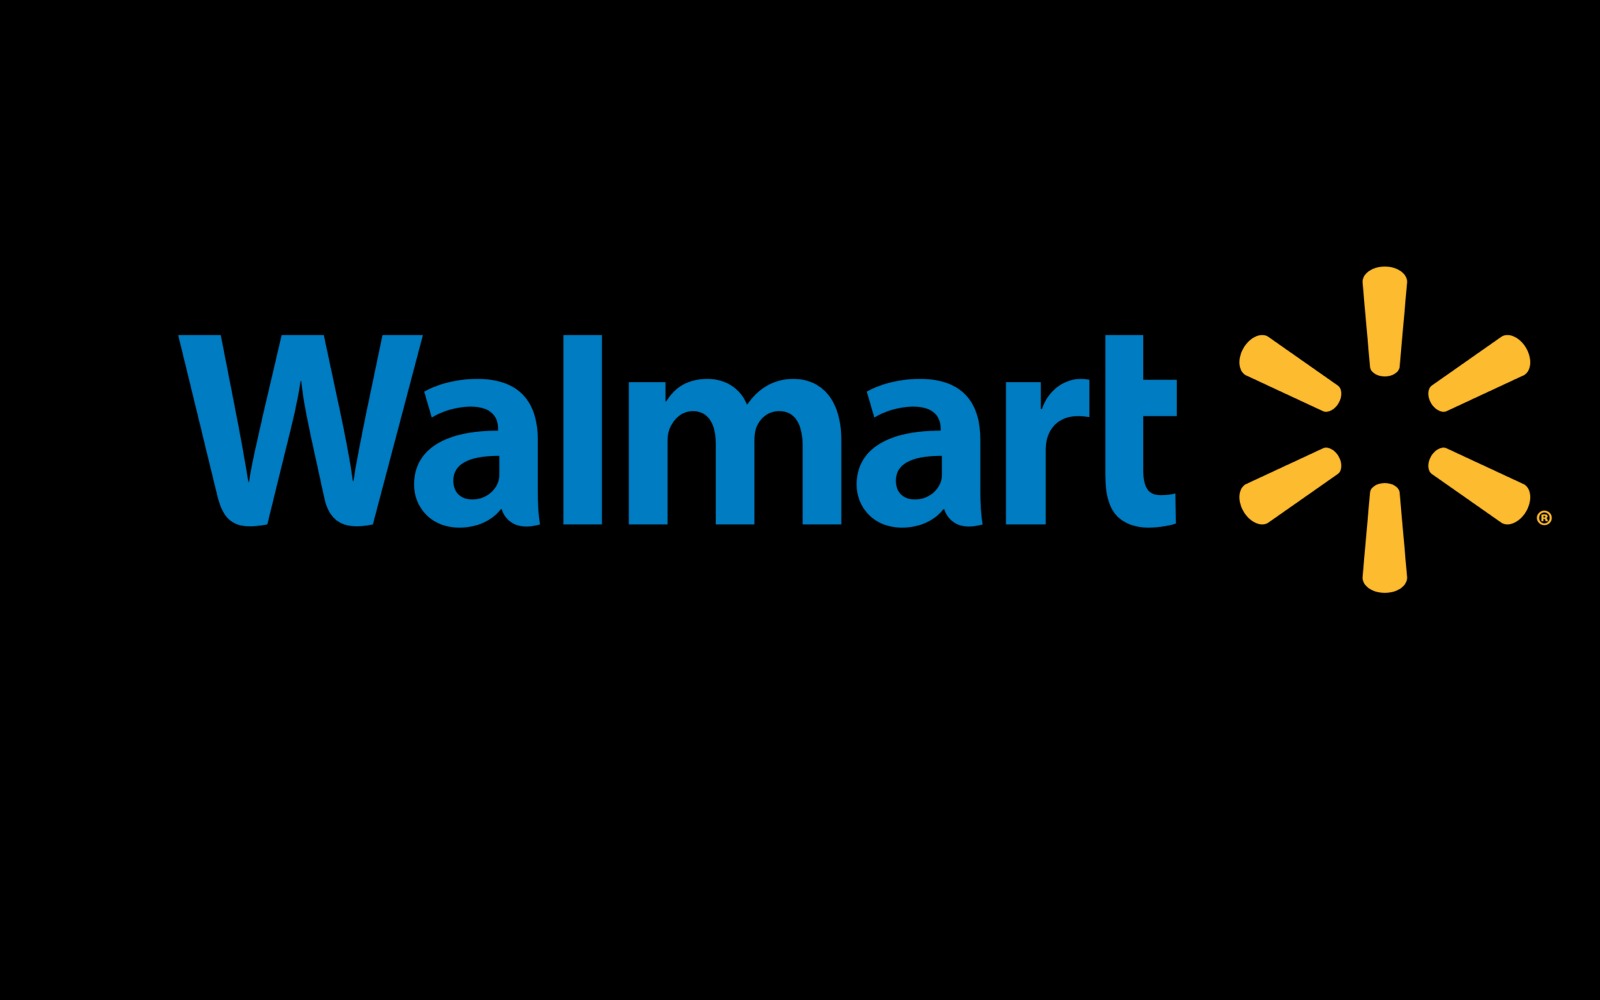 walmart text with yellow symbol on black background